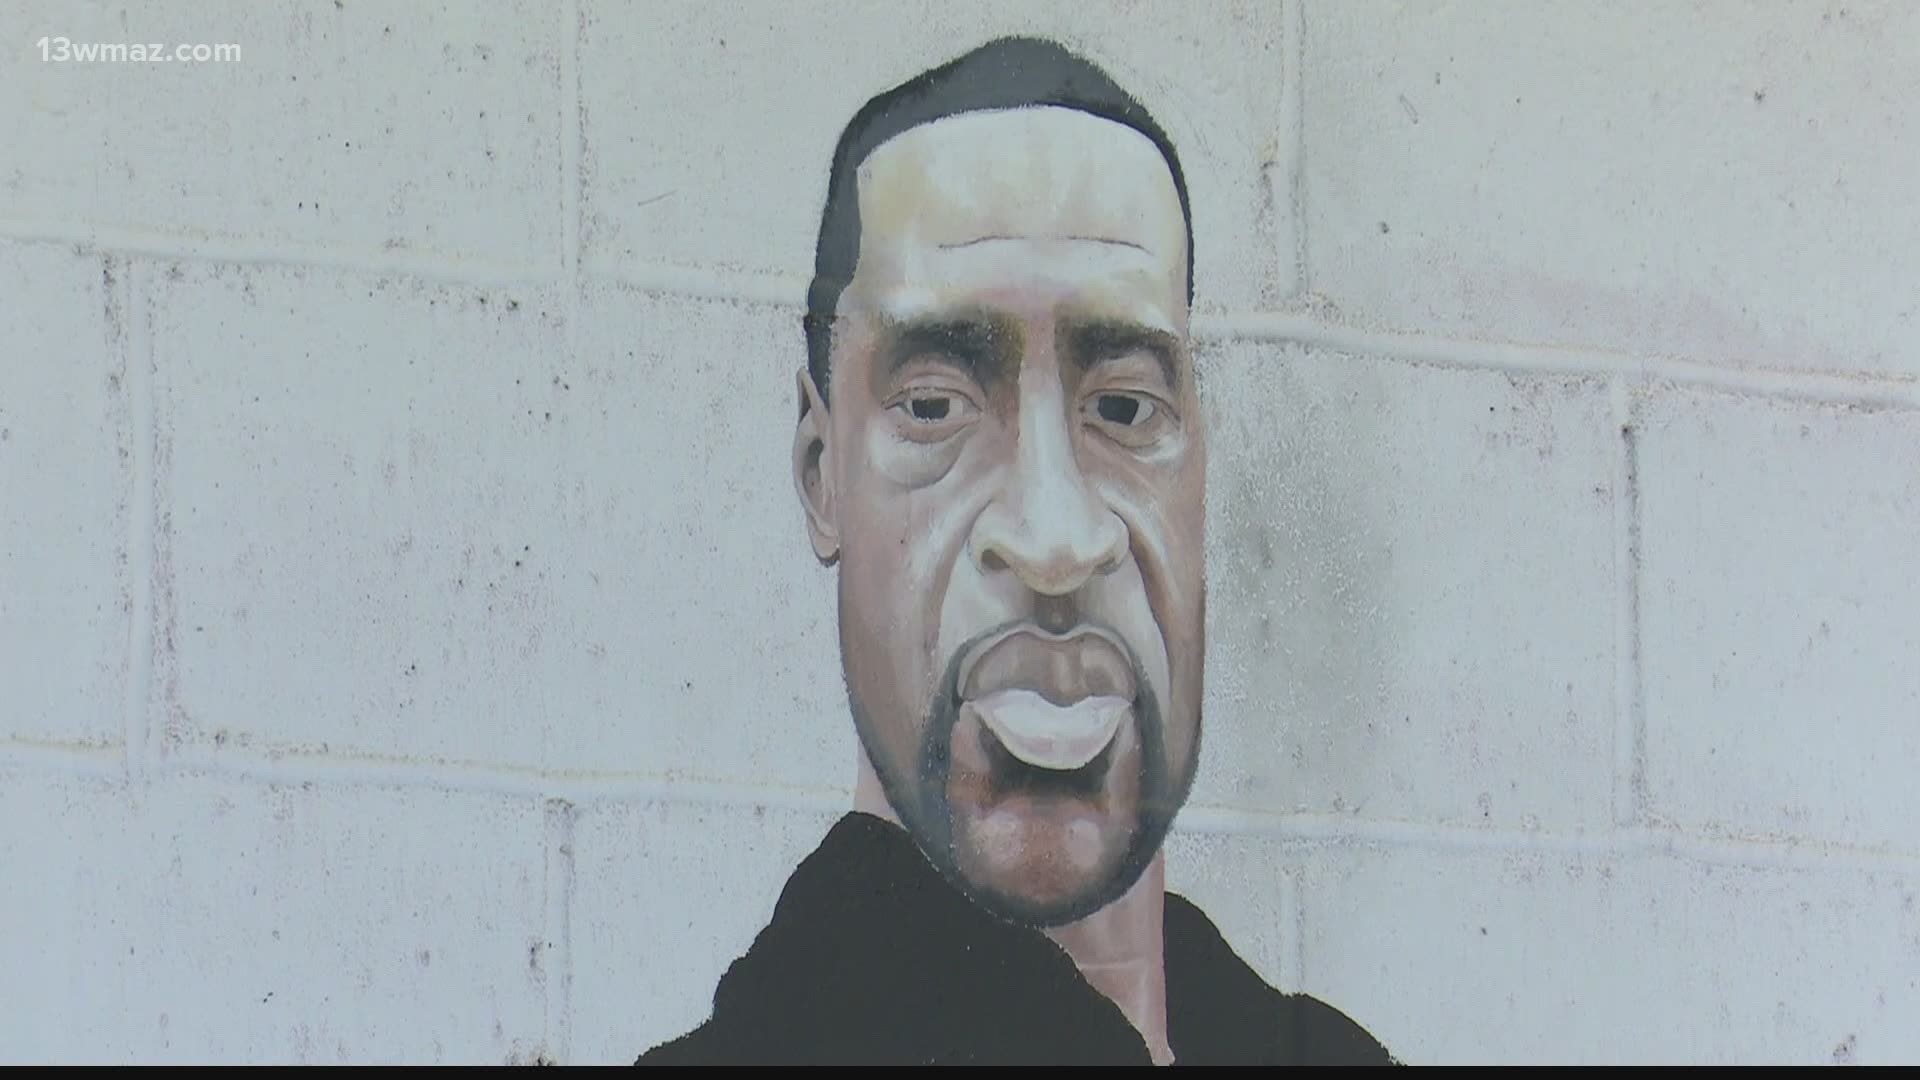 The mural honors George Floyd, a 46-year-old who died after he was stopped by police.